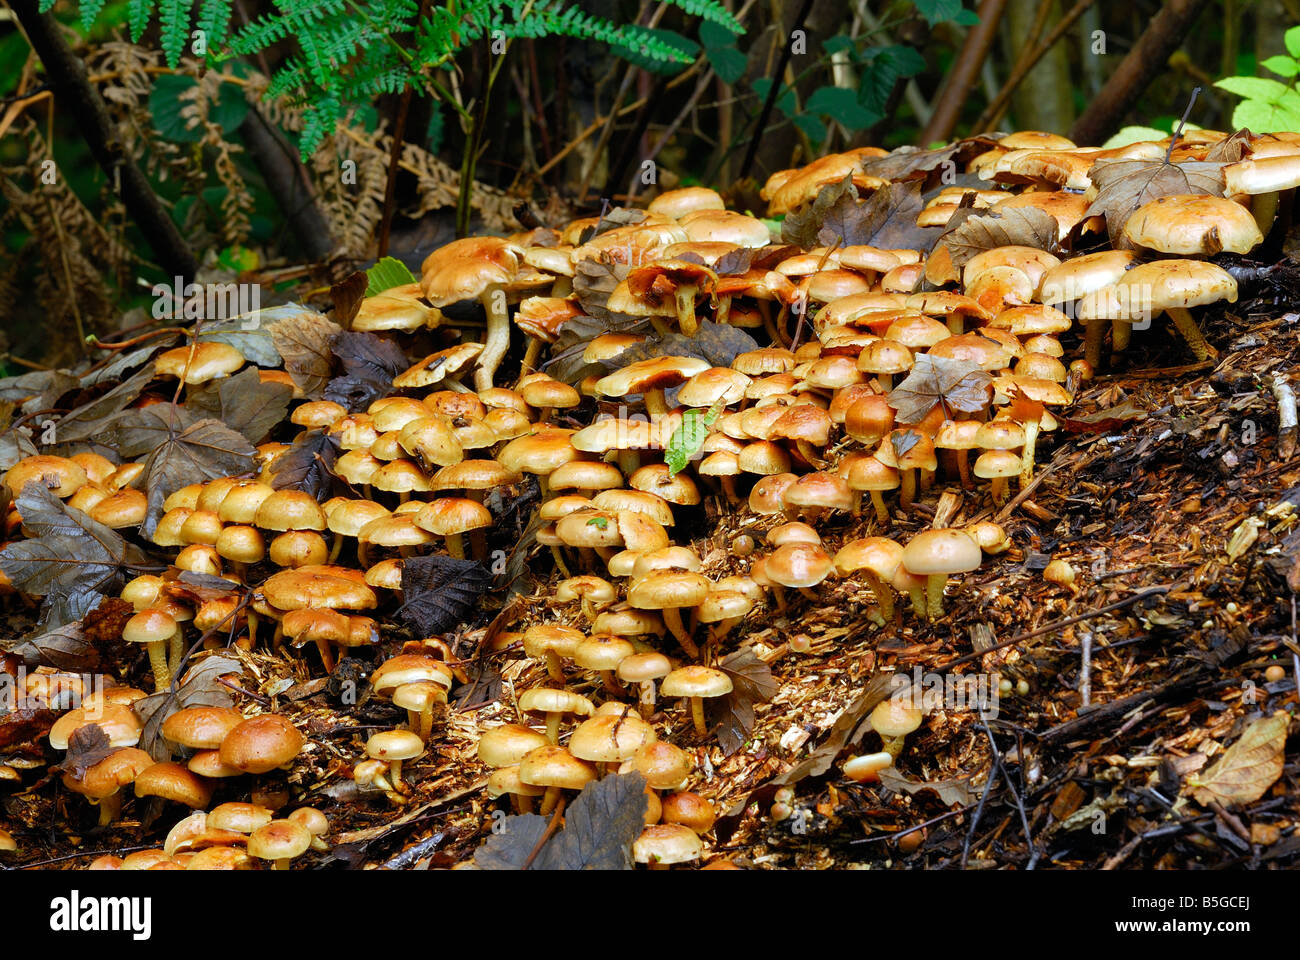 Sulphur Tuft fungi growing on old wood chippings Stock Photo